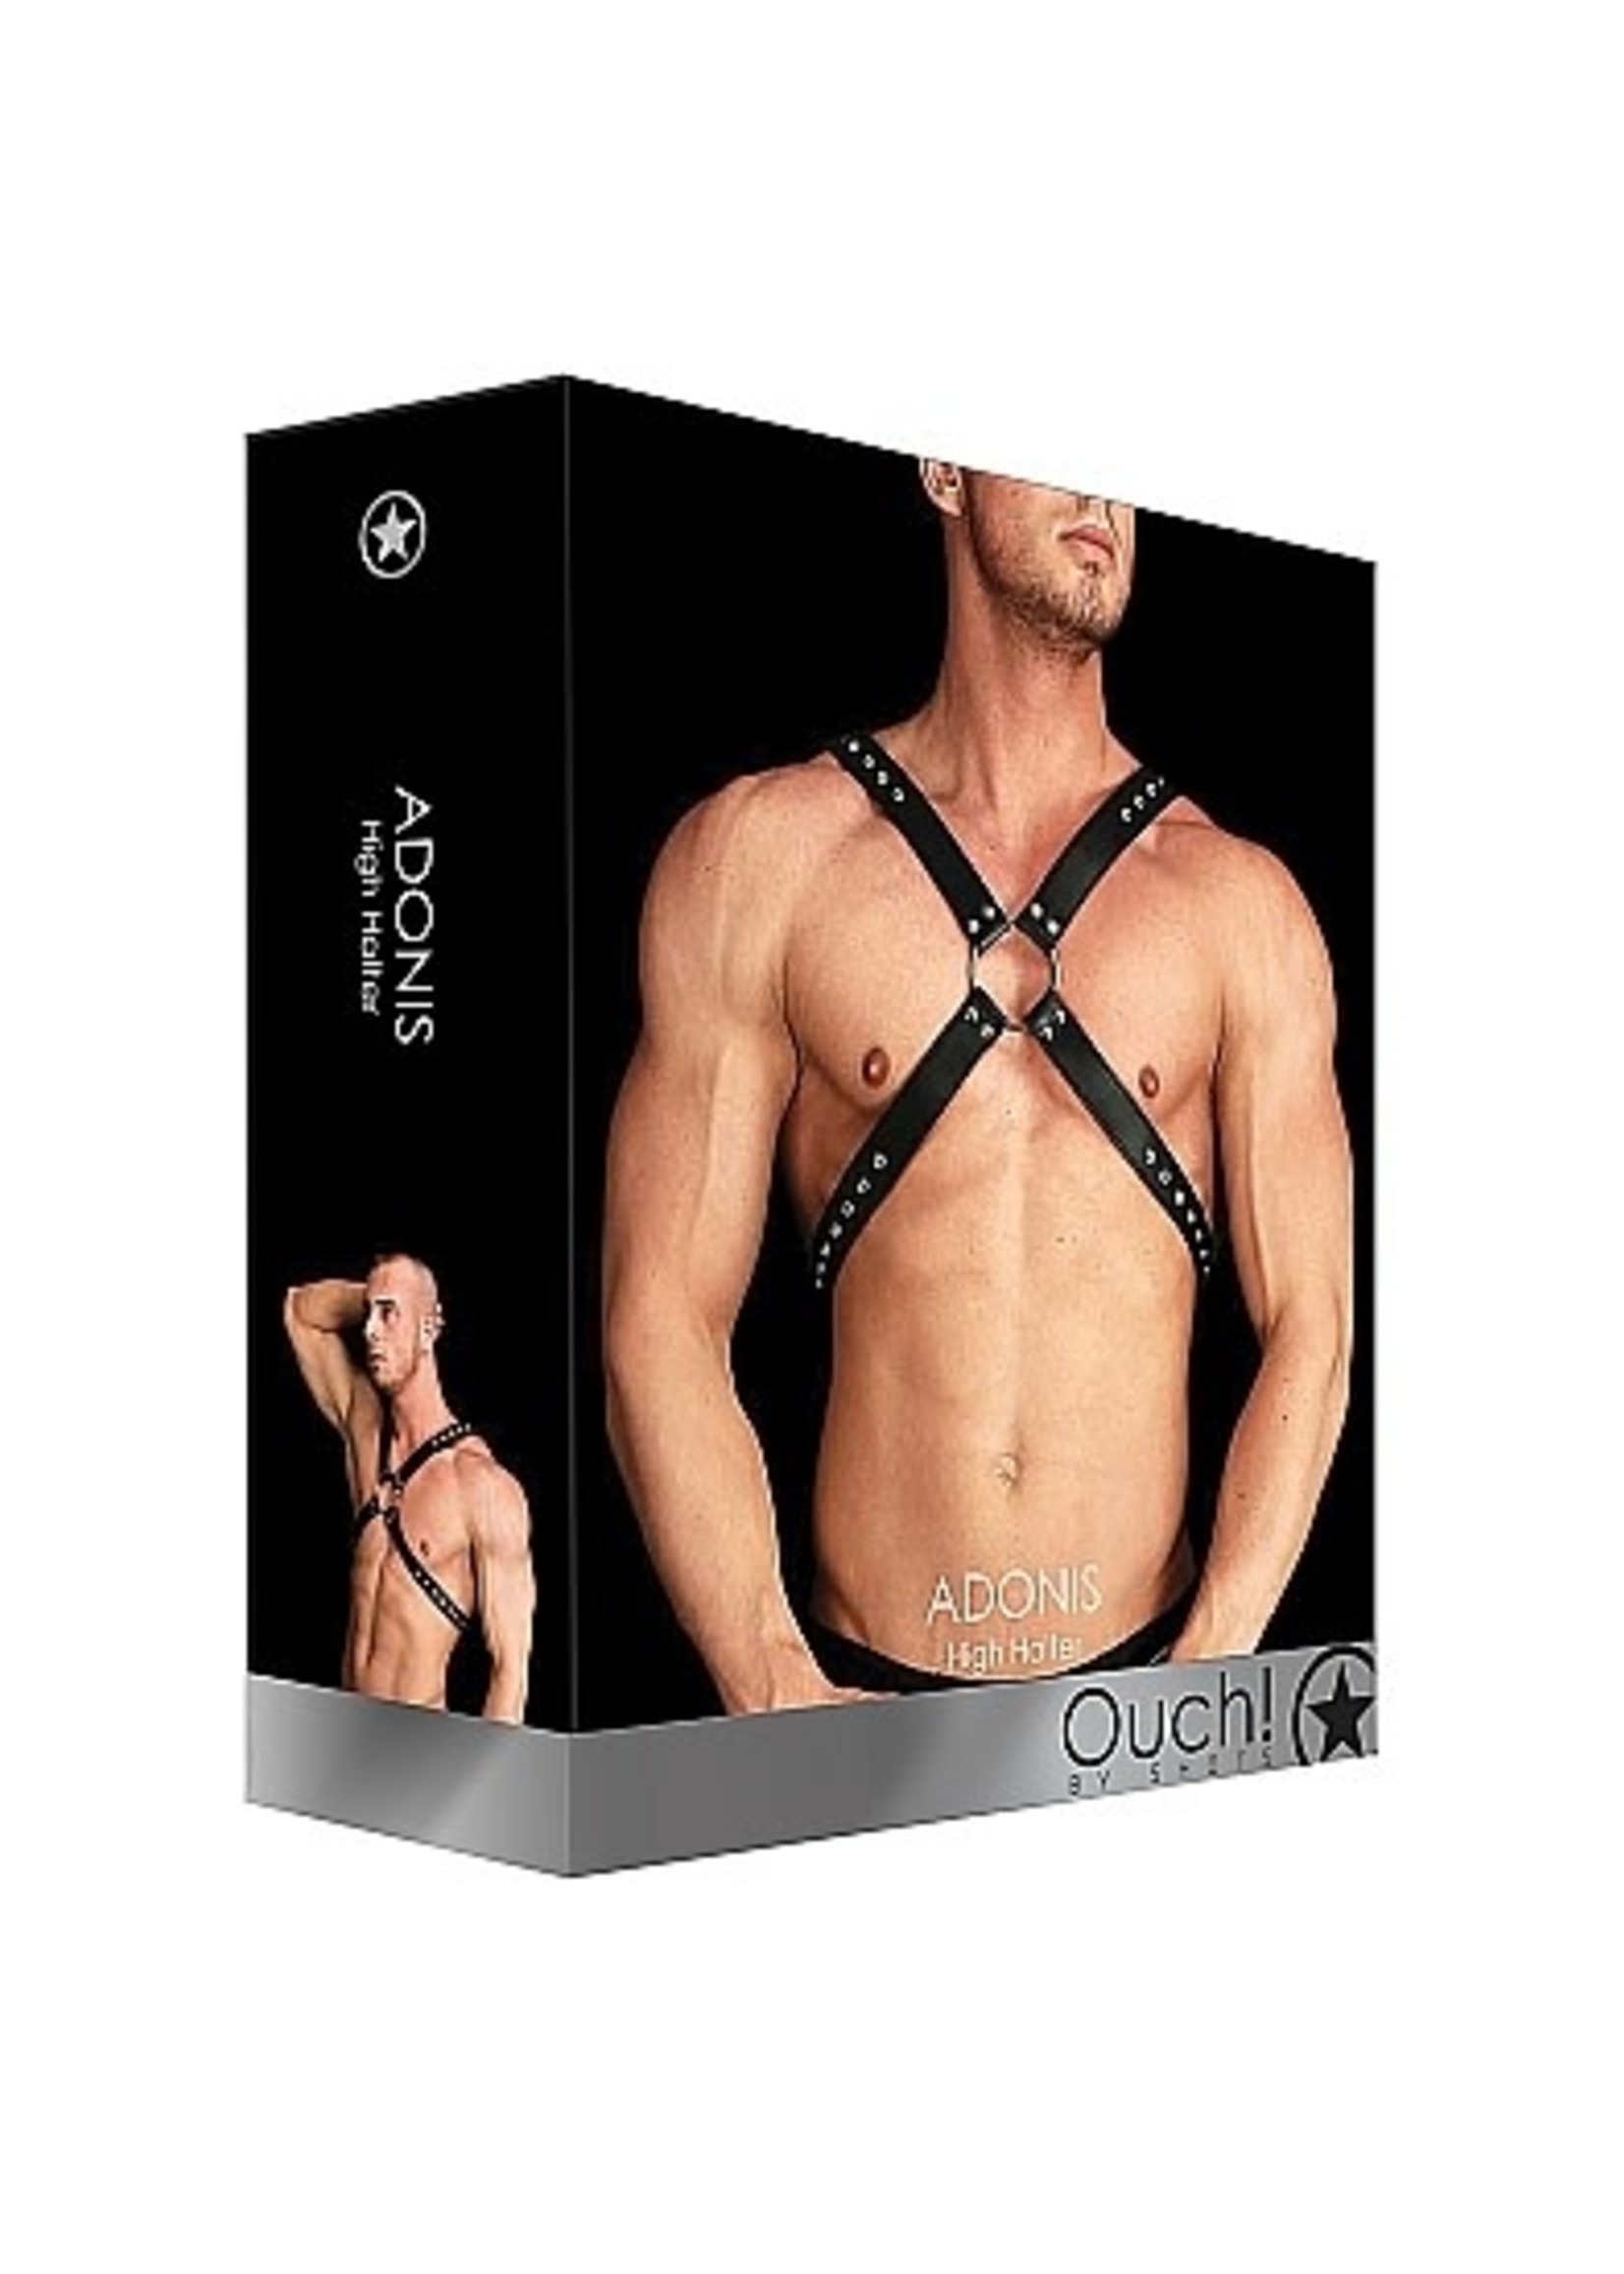 Ouch! Adonis high halter harness OneSize